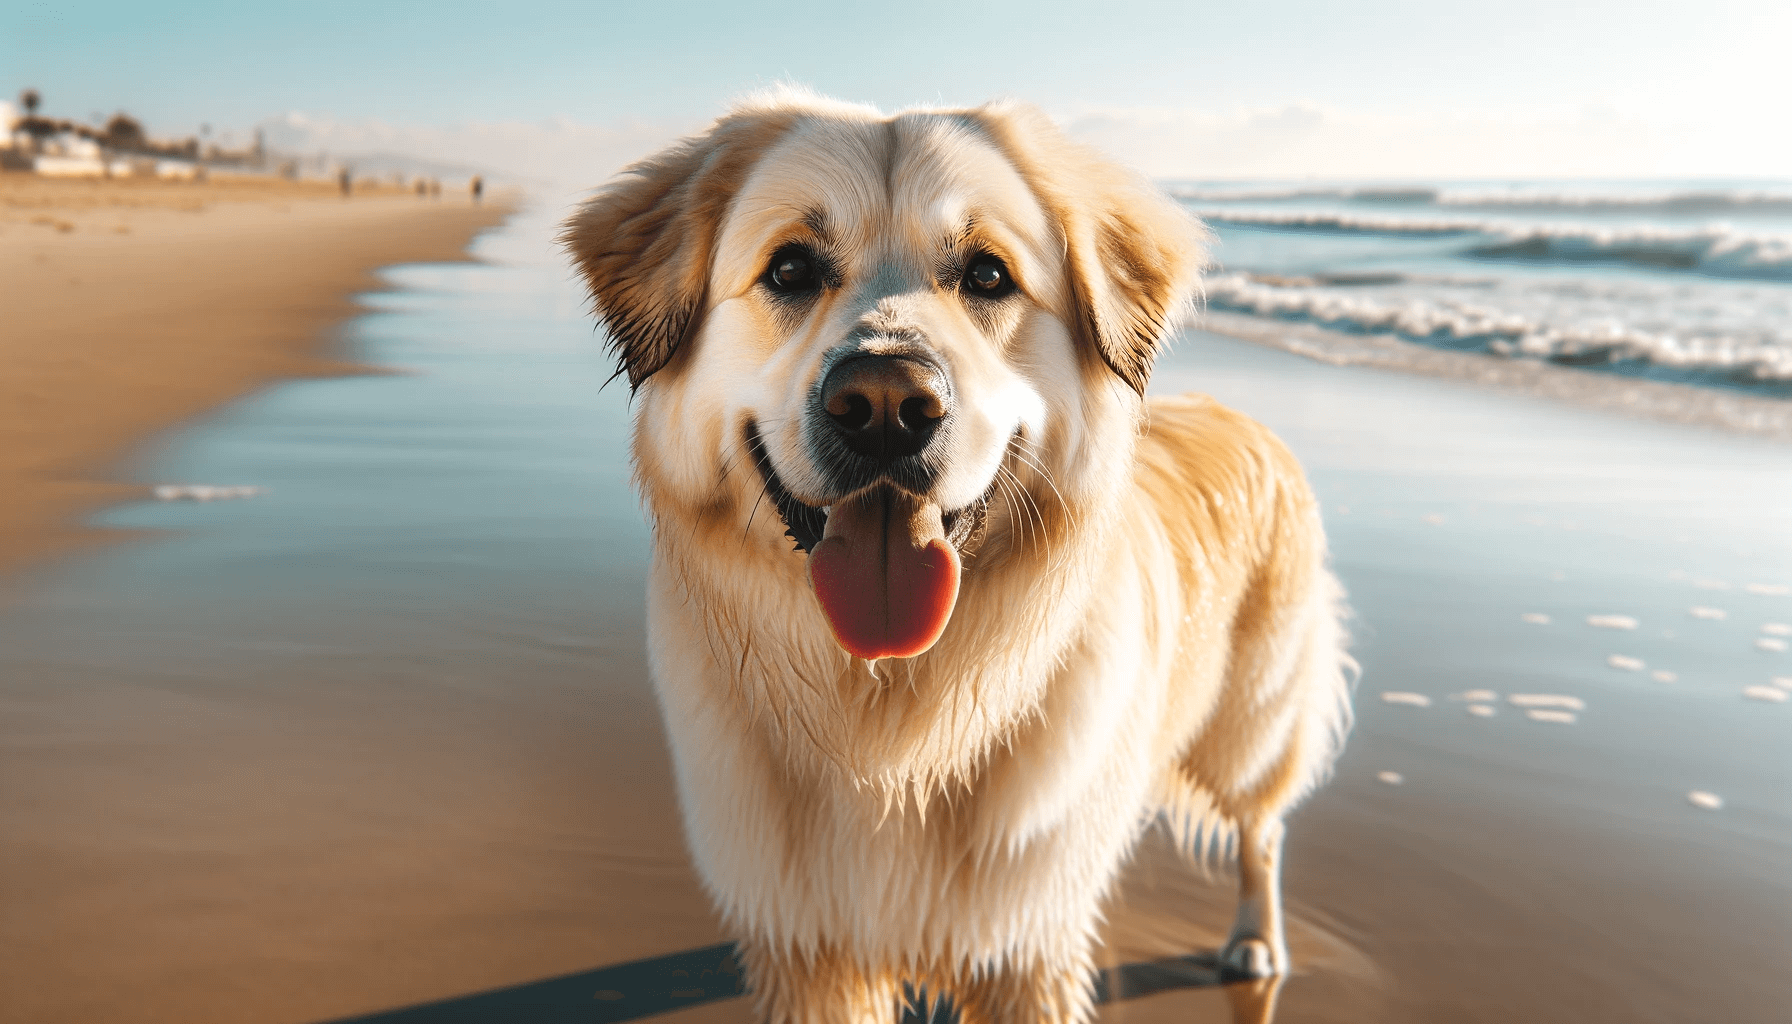 Pyrenees Lab Mix dog with a light cream-colored coat standing on a sandy beach with the ocean in the background. The dog is looking directly at the